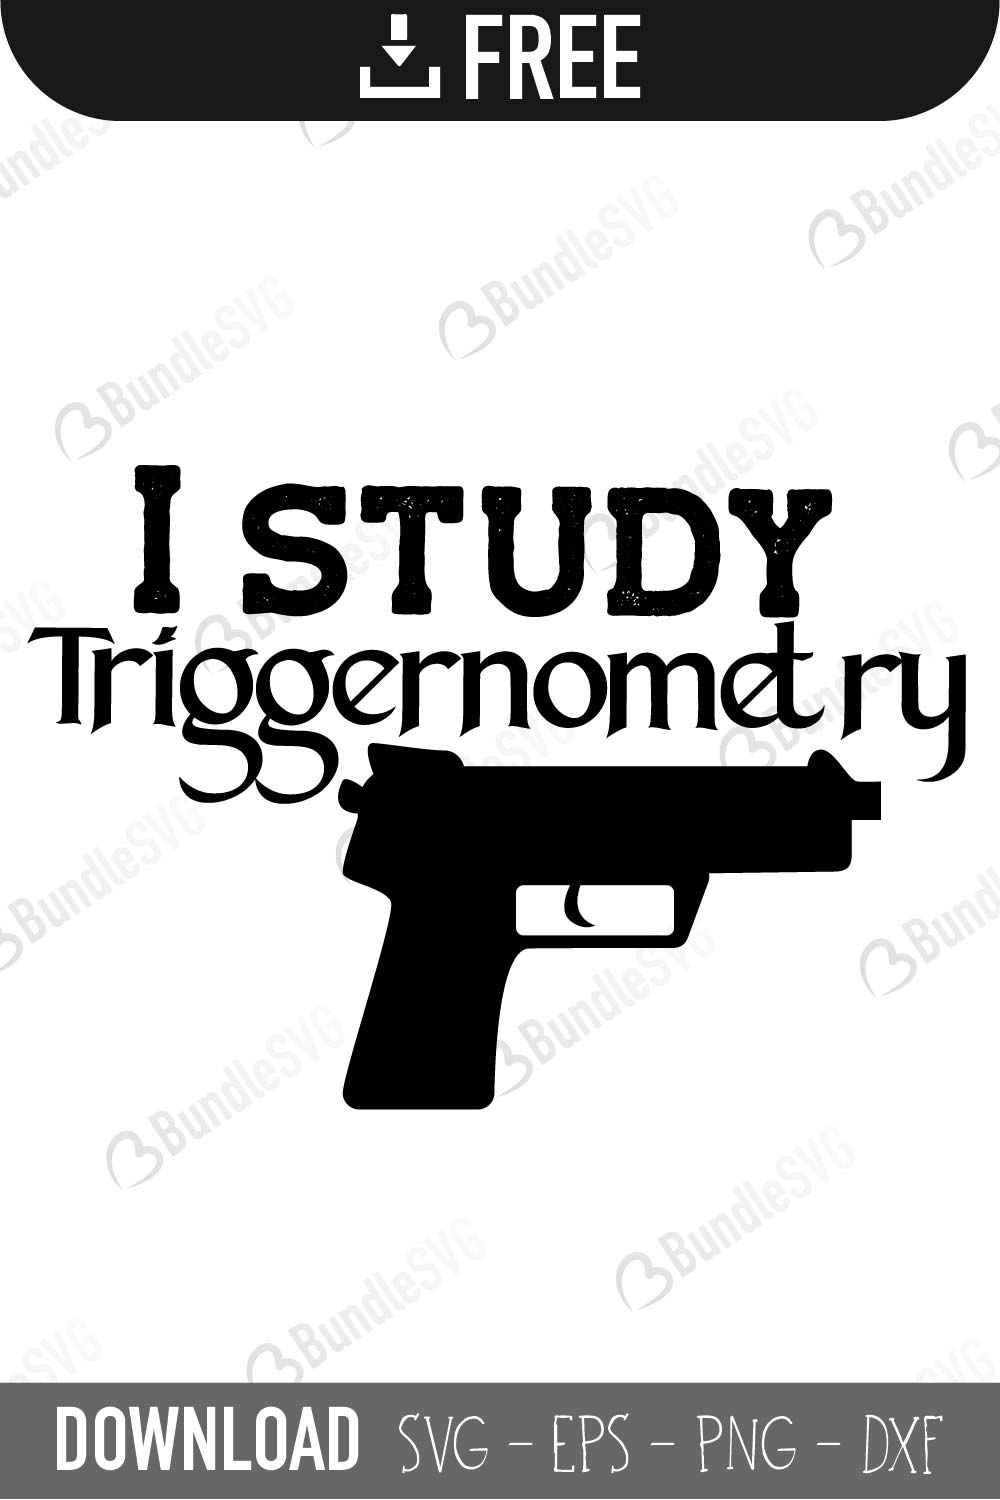 Download I Study Triggernometry Svg Humor Sarcastic Svg Png Dxf Eps Funny Download Files Mans Quotes Gun Svg Firearm Svg Cricut T Shirt Designs File Art Collectibles Drawing Illustration 330 Co Il